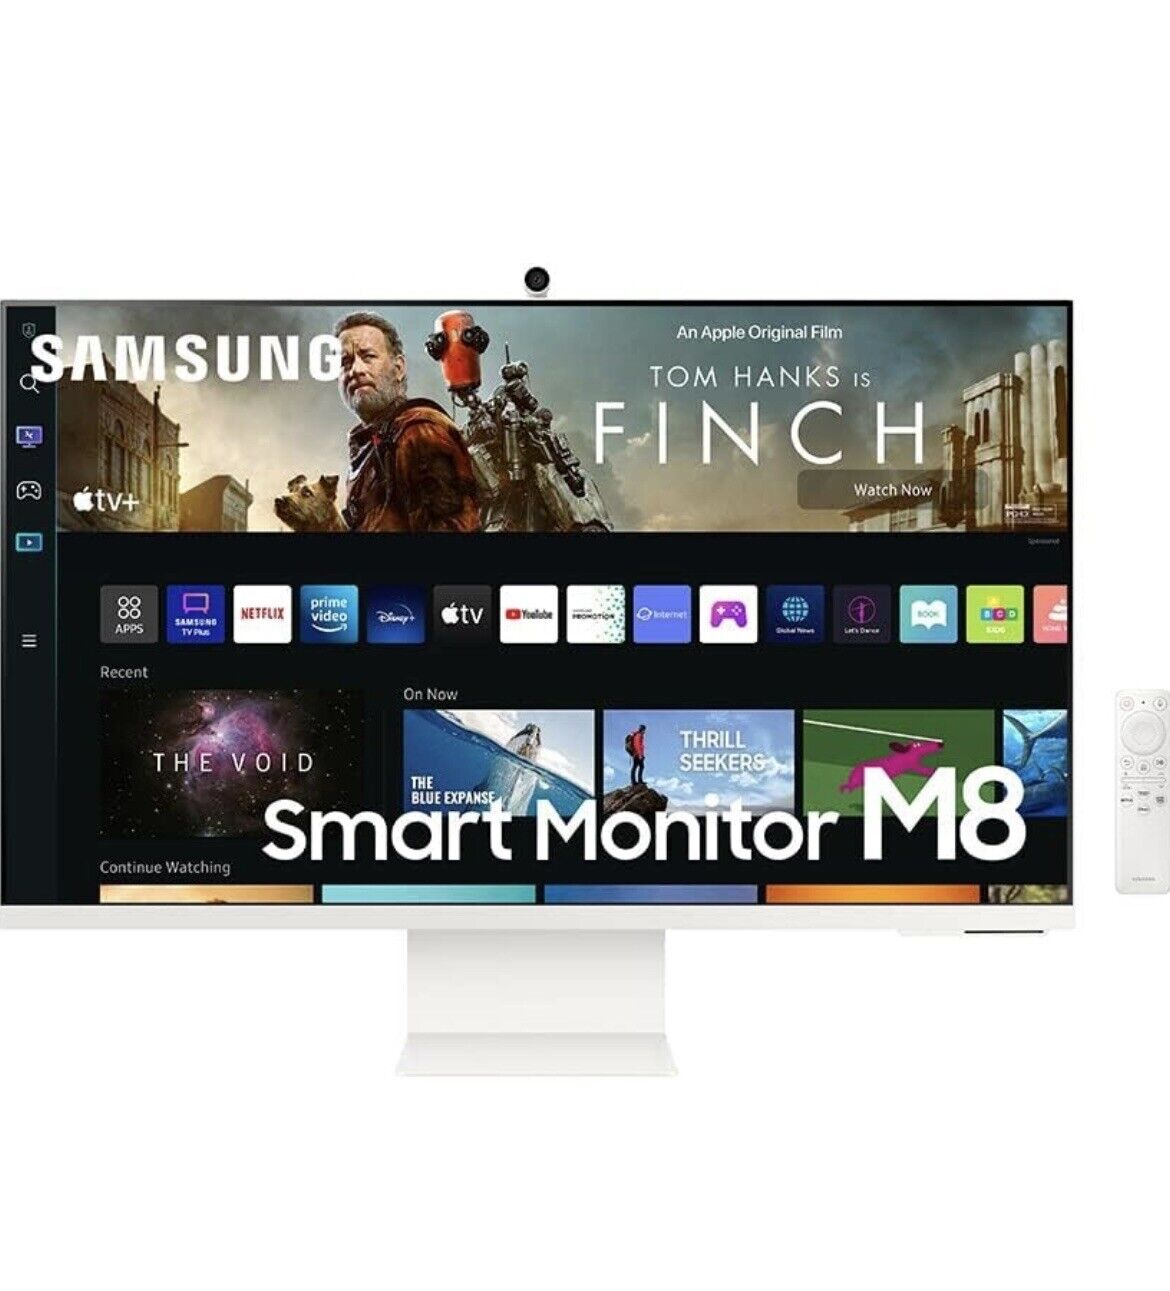 SAMSUNG M8 Series 32-Inch 4K UHD Smart Monitor & Streaming TV with Webcam